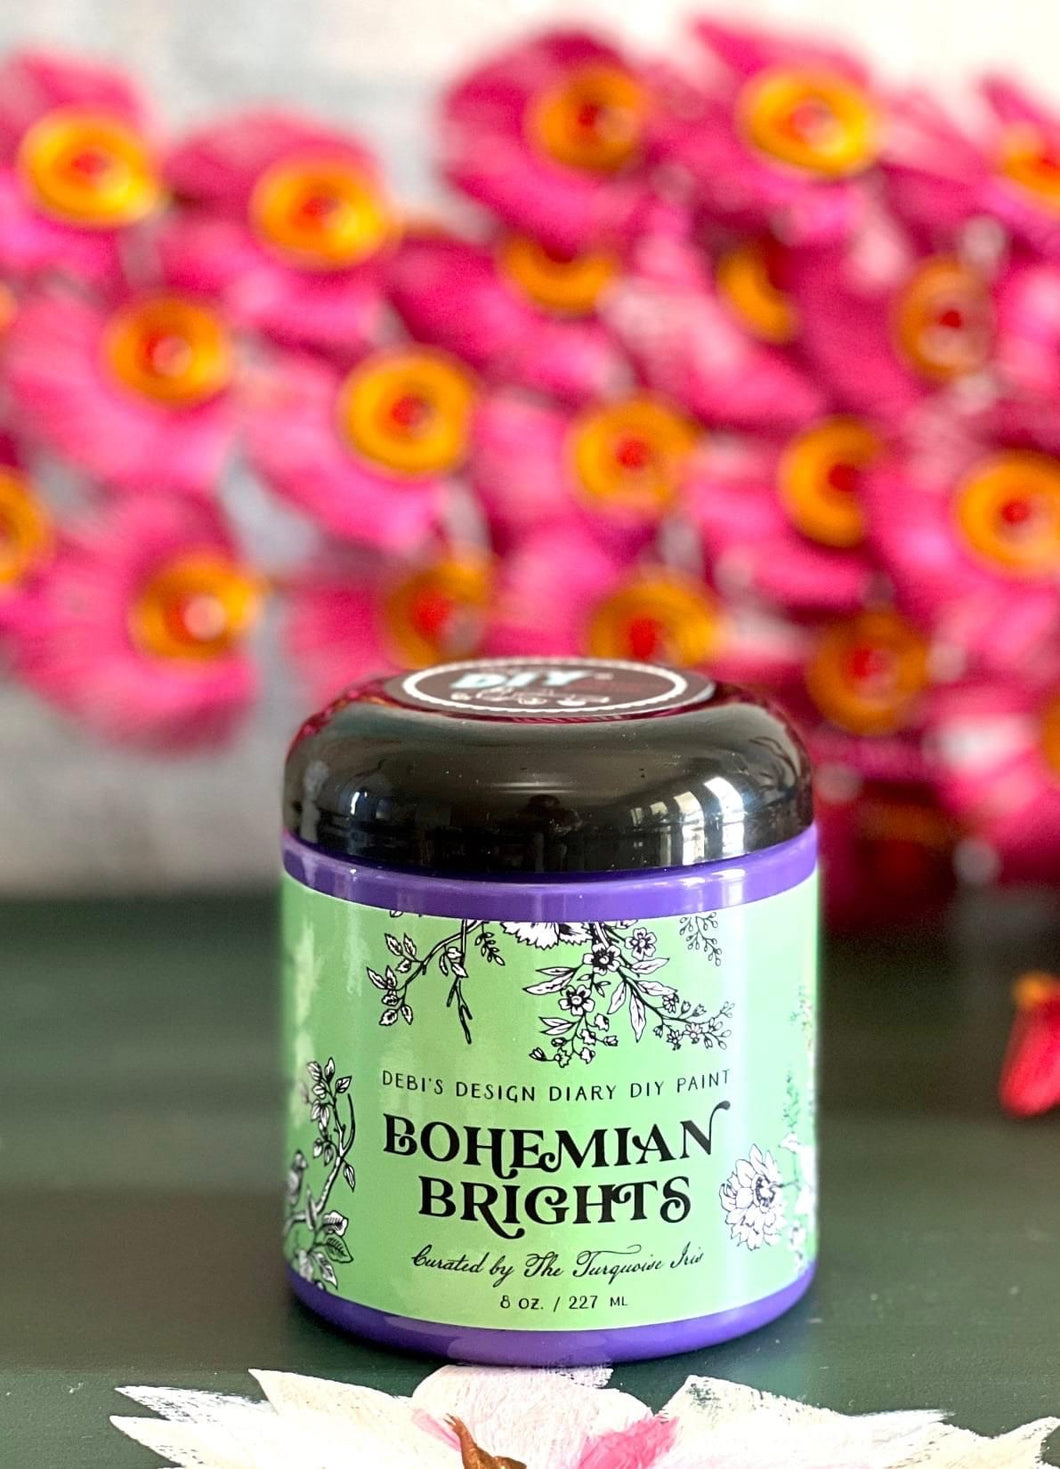 Flourished- Bohemian Brights  - Created by the Turquoise Iris for DIY PAINT - New Product